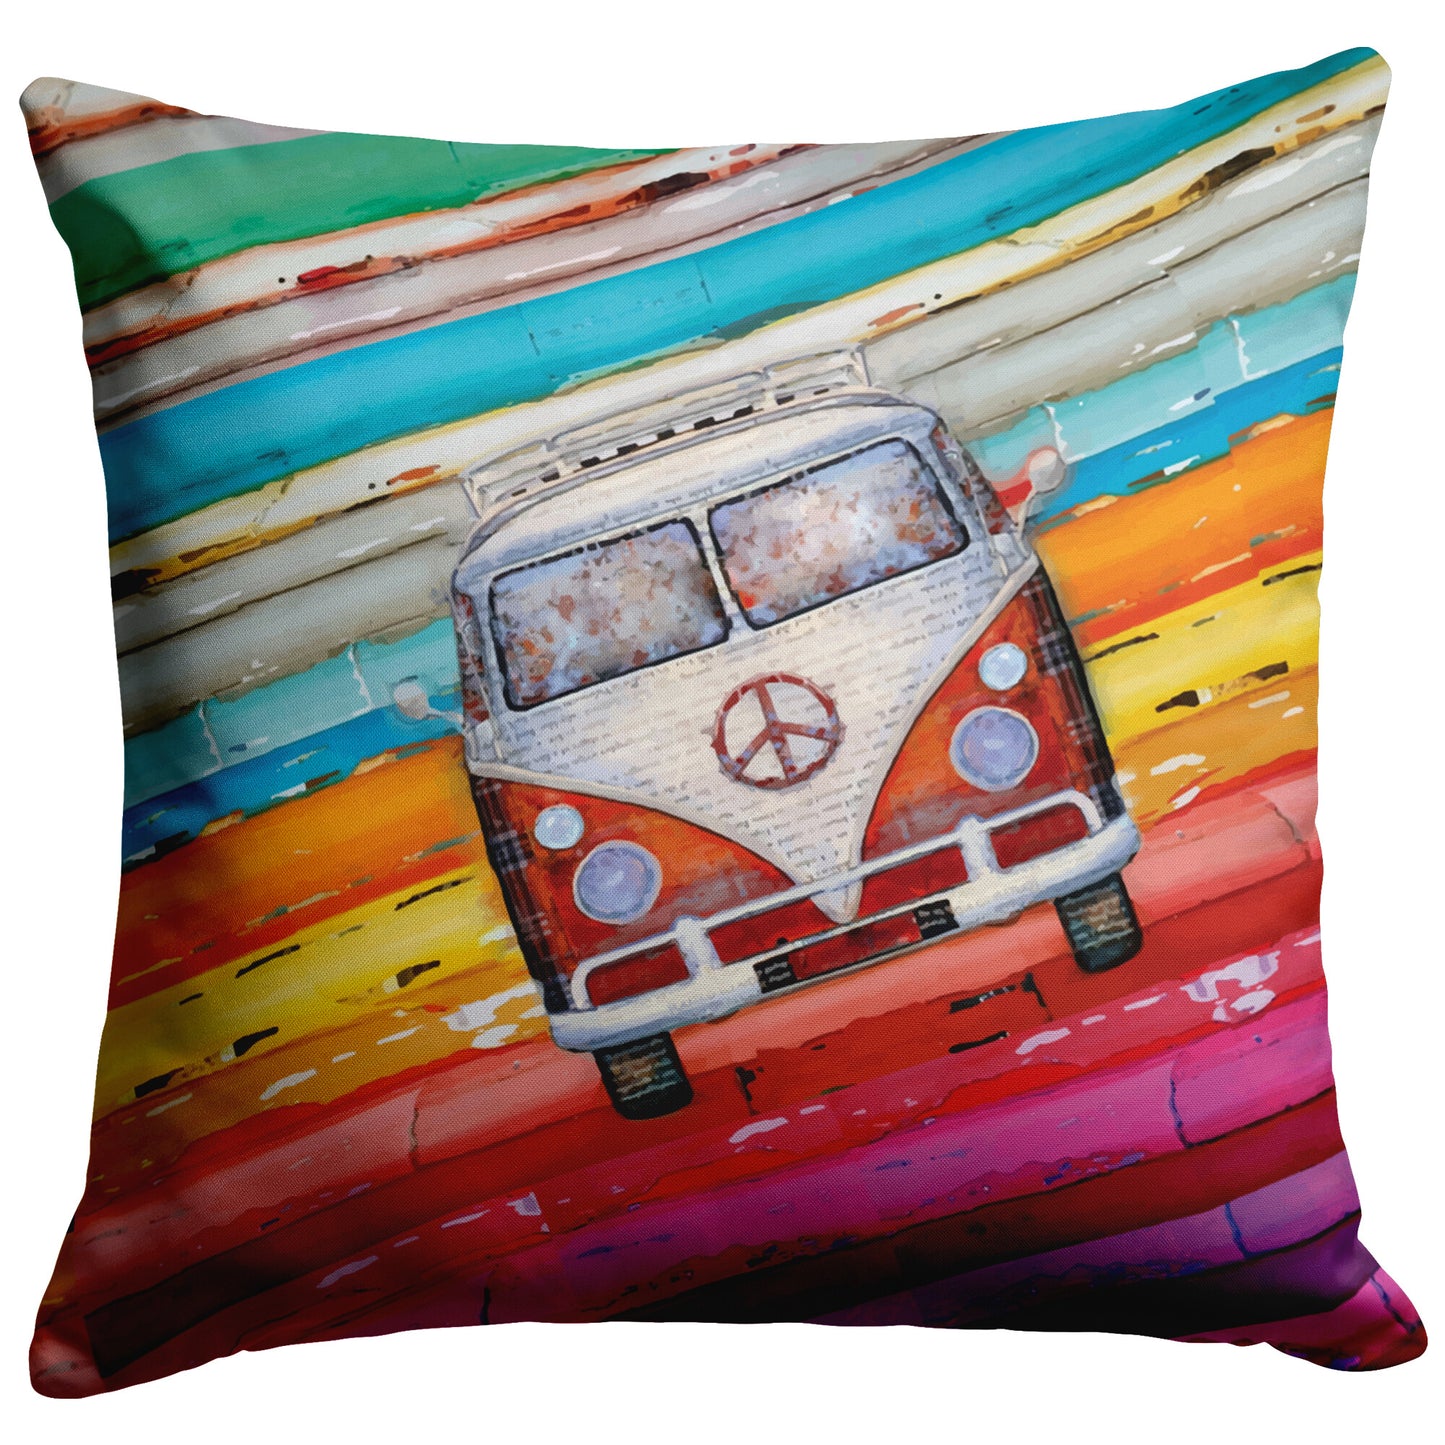 Groovy Hippie Van Pillows And Covers